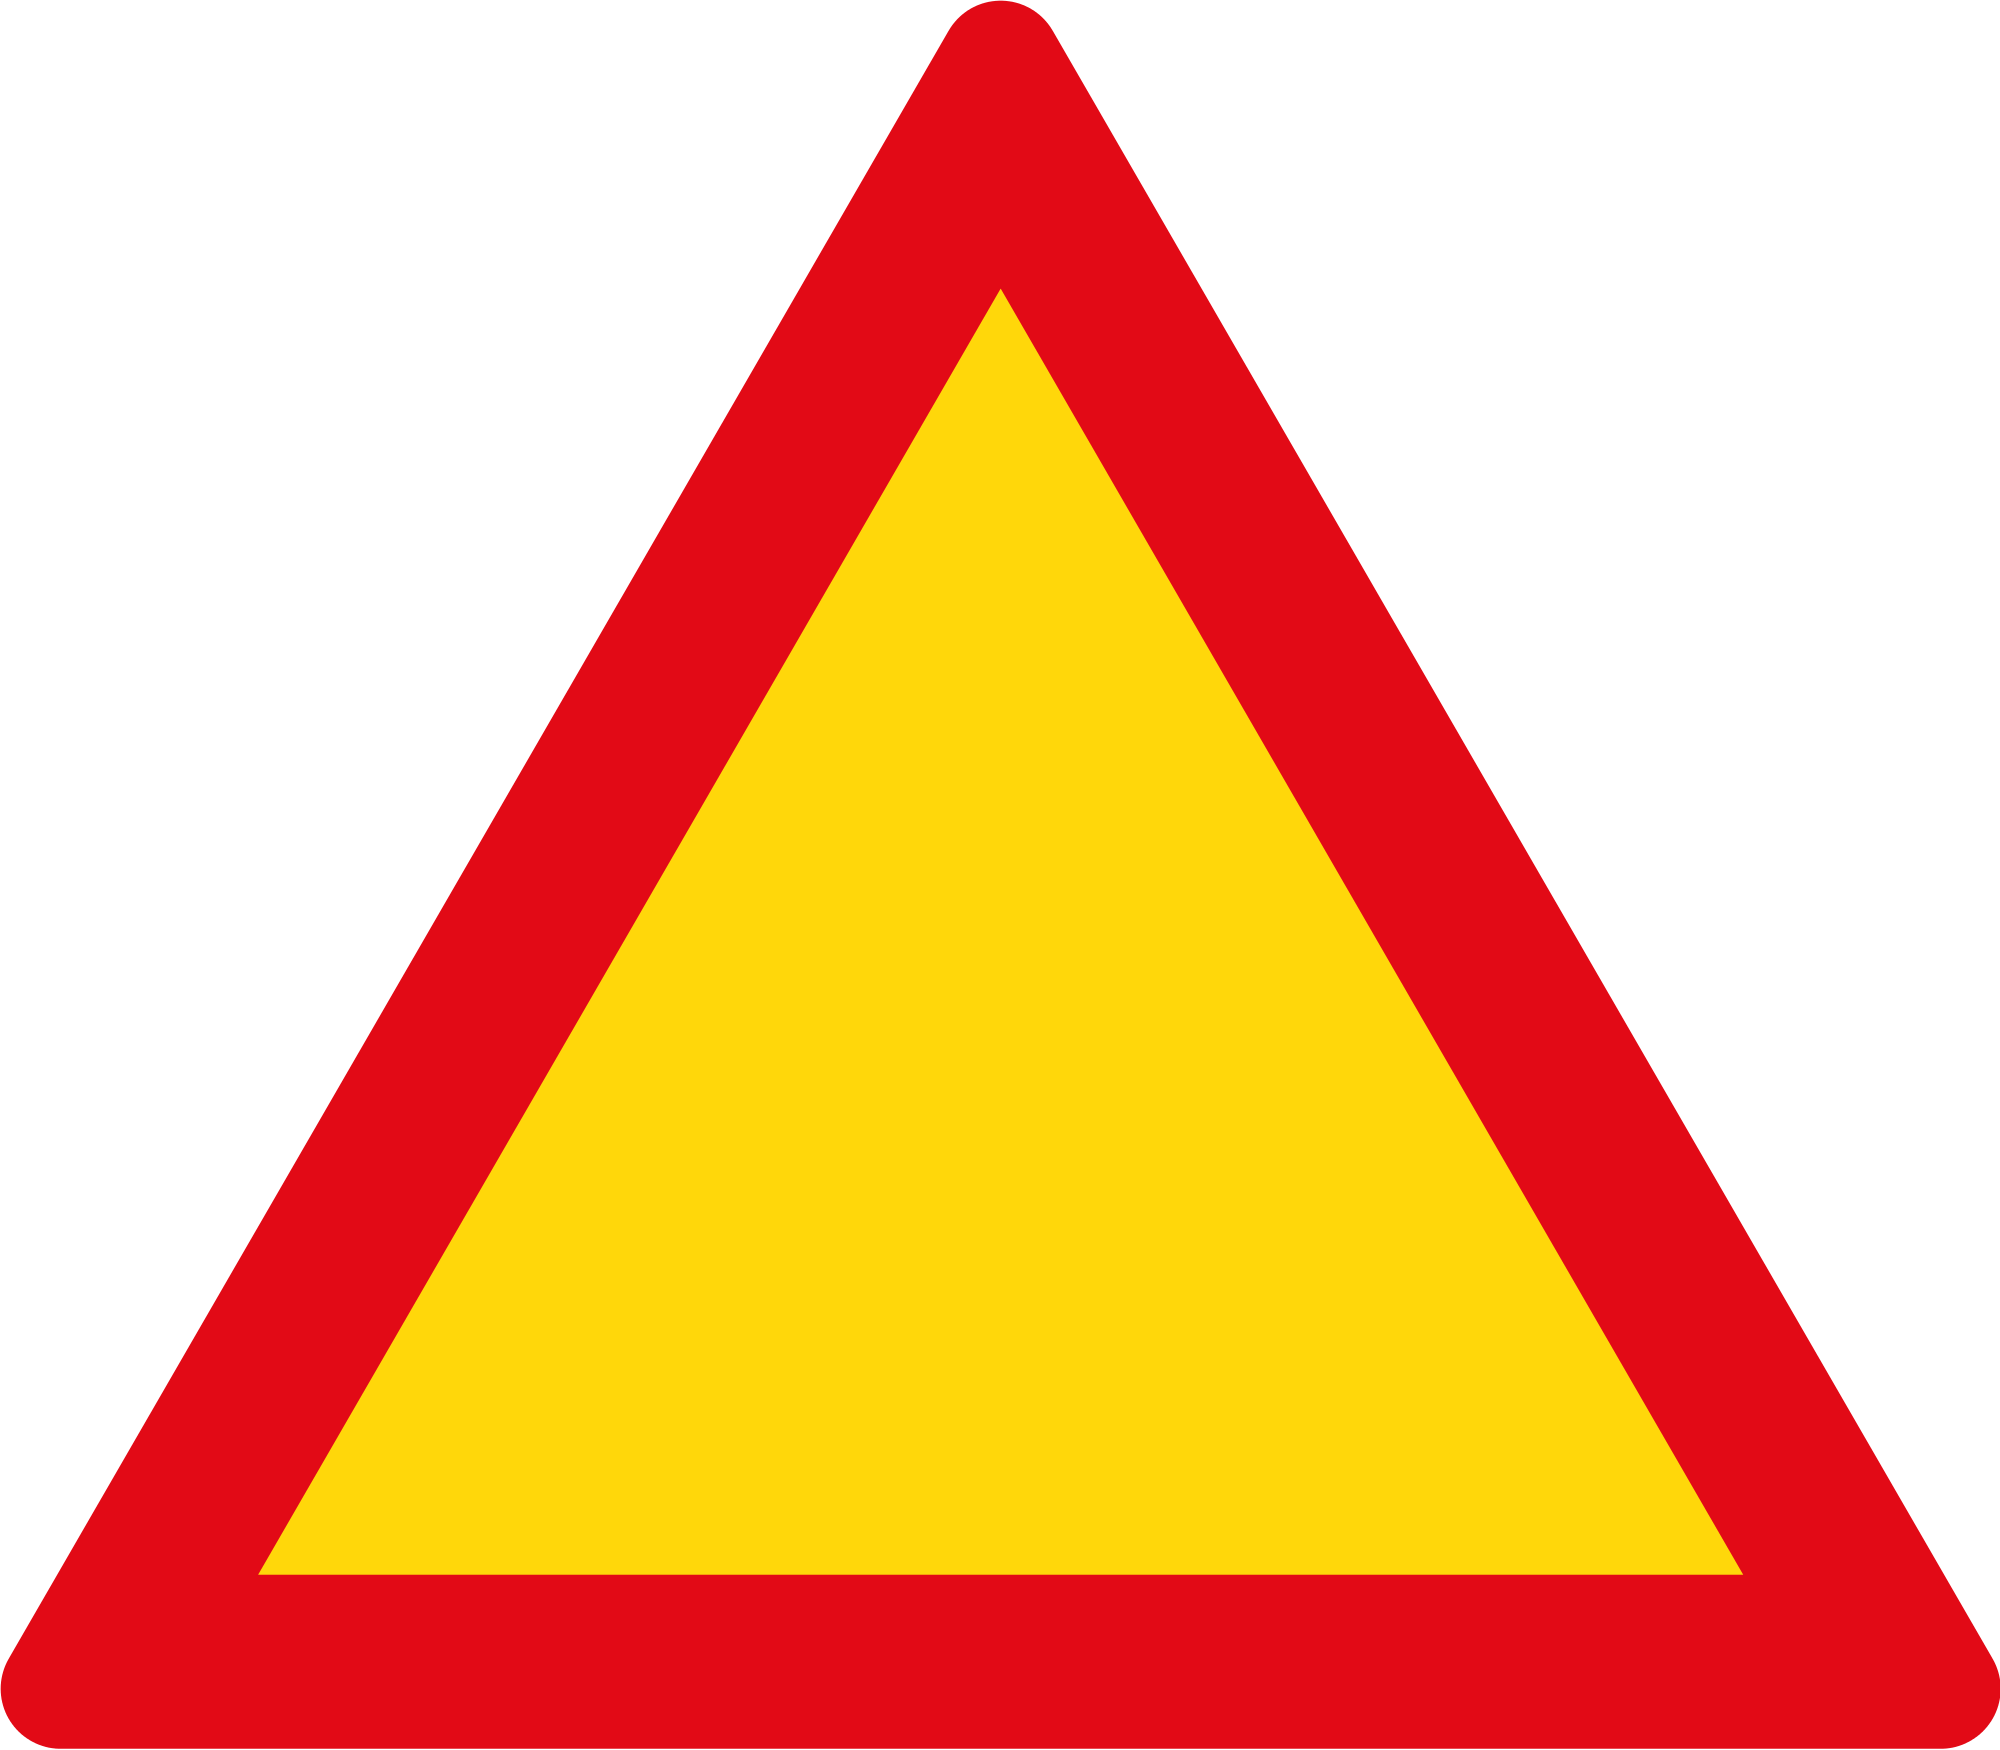 Red Orange Triangle Logo - Triangle warning sign (red and yellow).svg